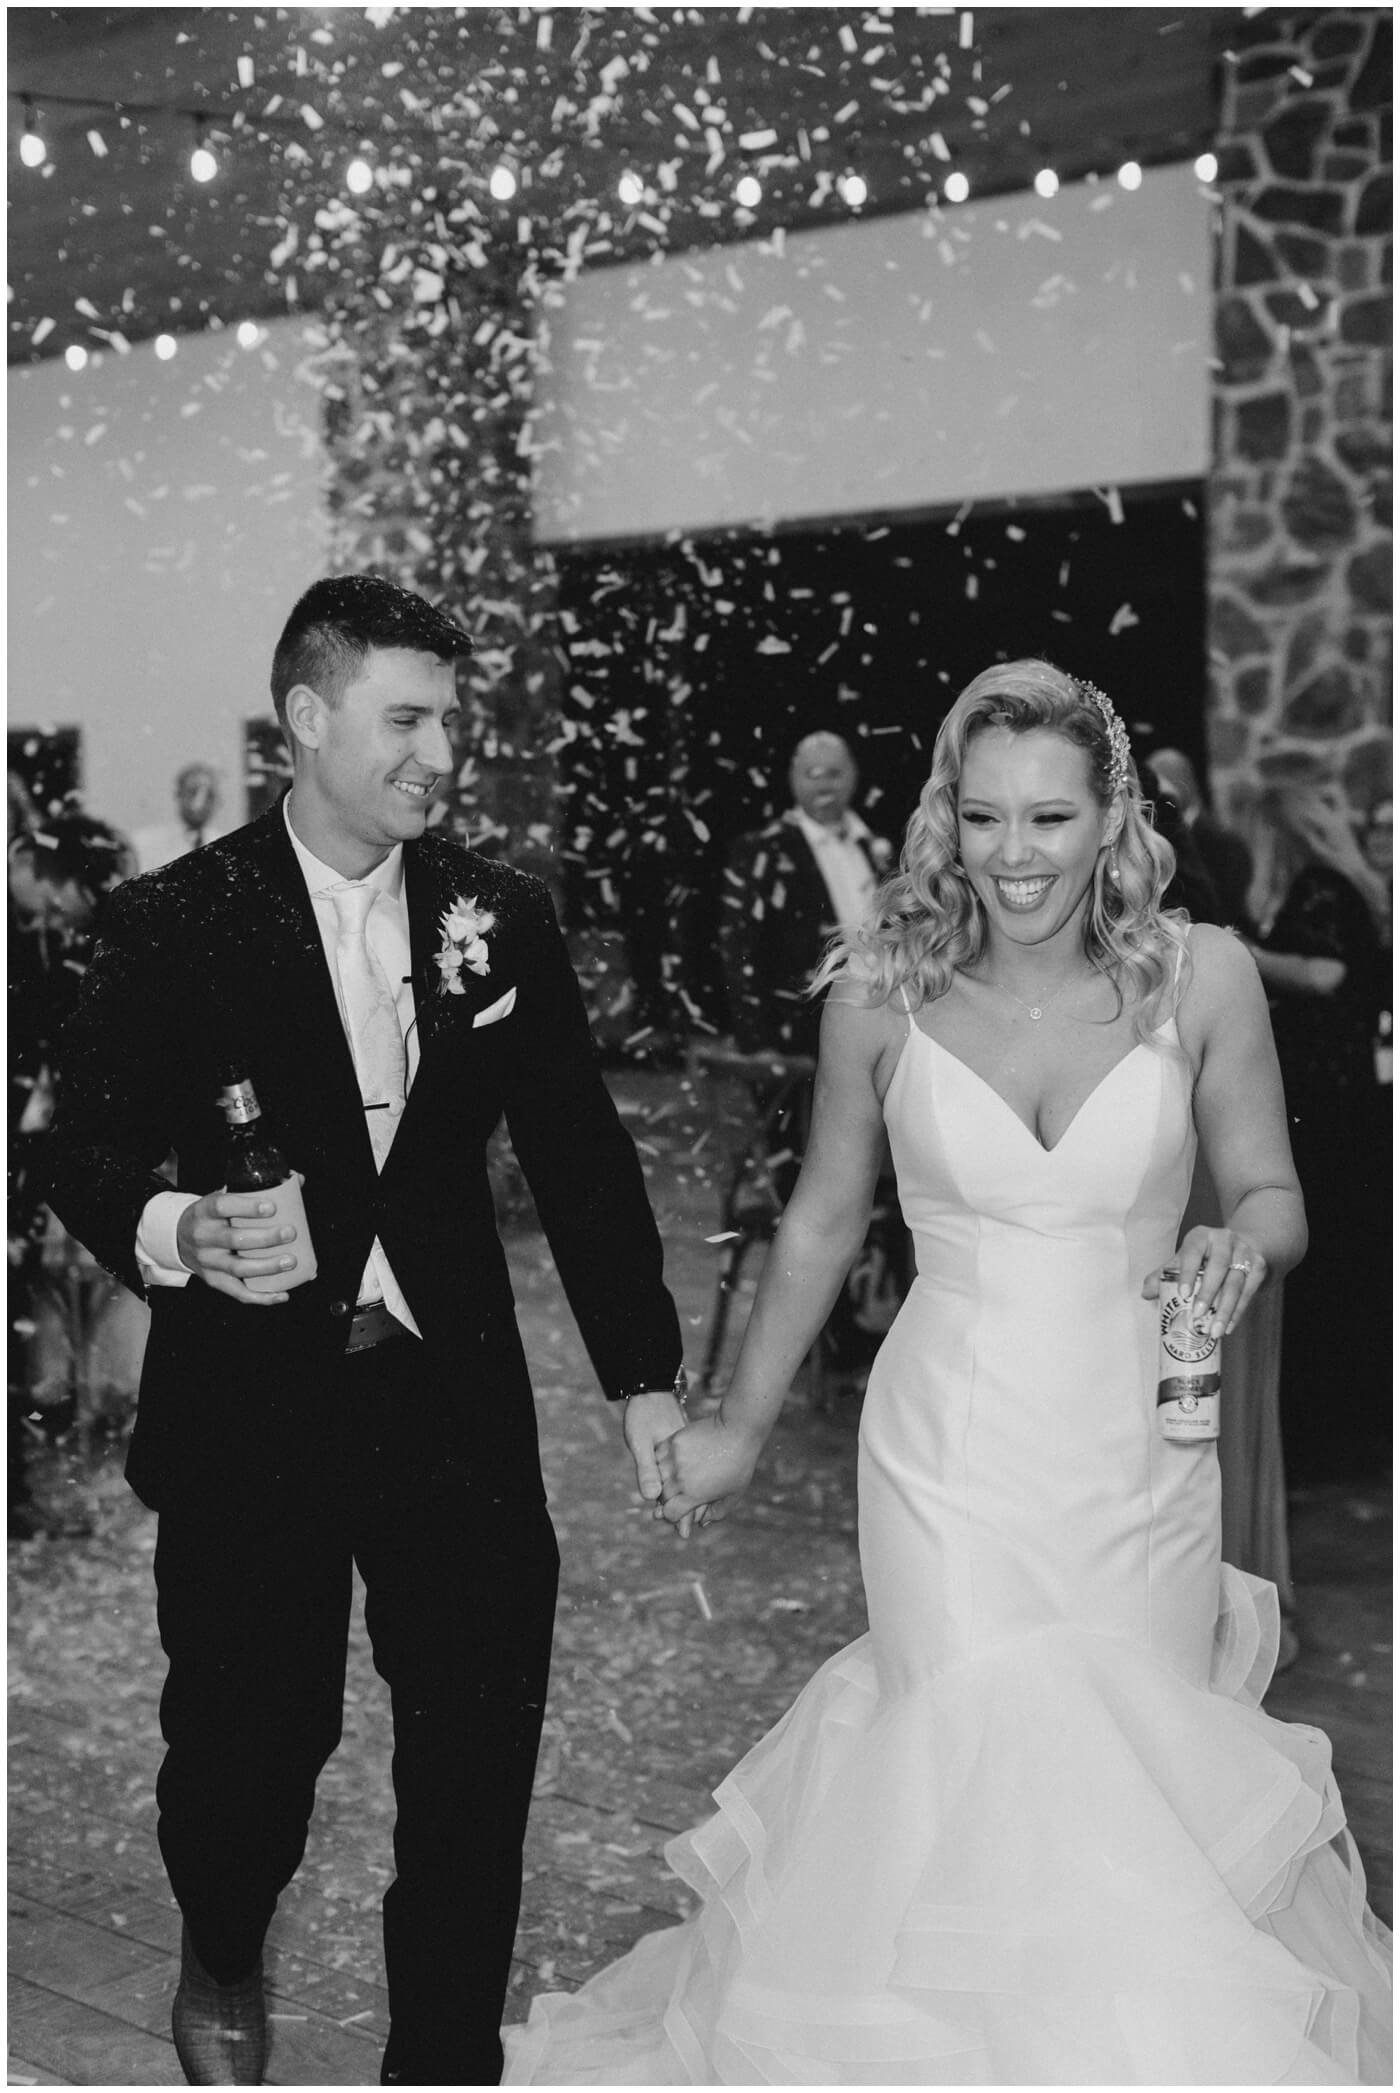 Houston Wedding at The Vine | confetti falls as the bride and groom enter their reception